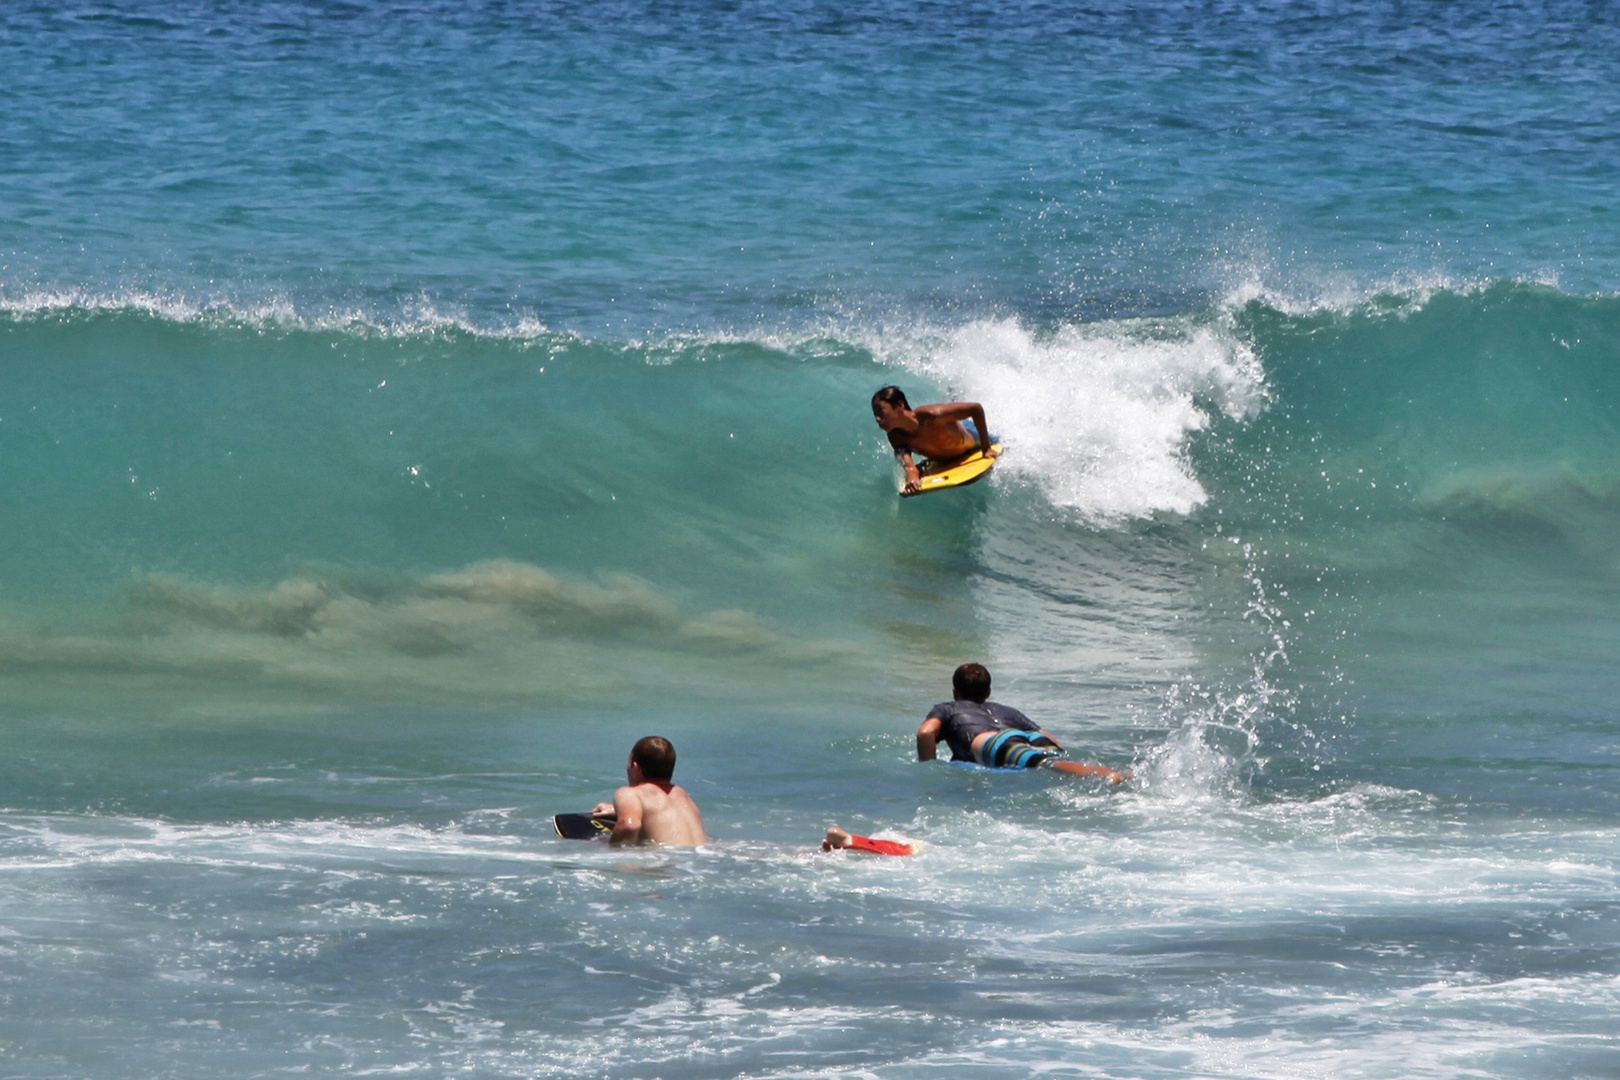 Koloa Vacation Rentals, Pili Mai 11K - Looking for ocean adventure? Go out for a day of surfing or boogie boarding